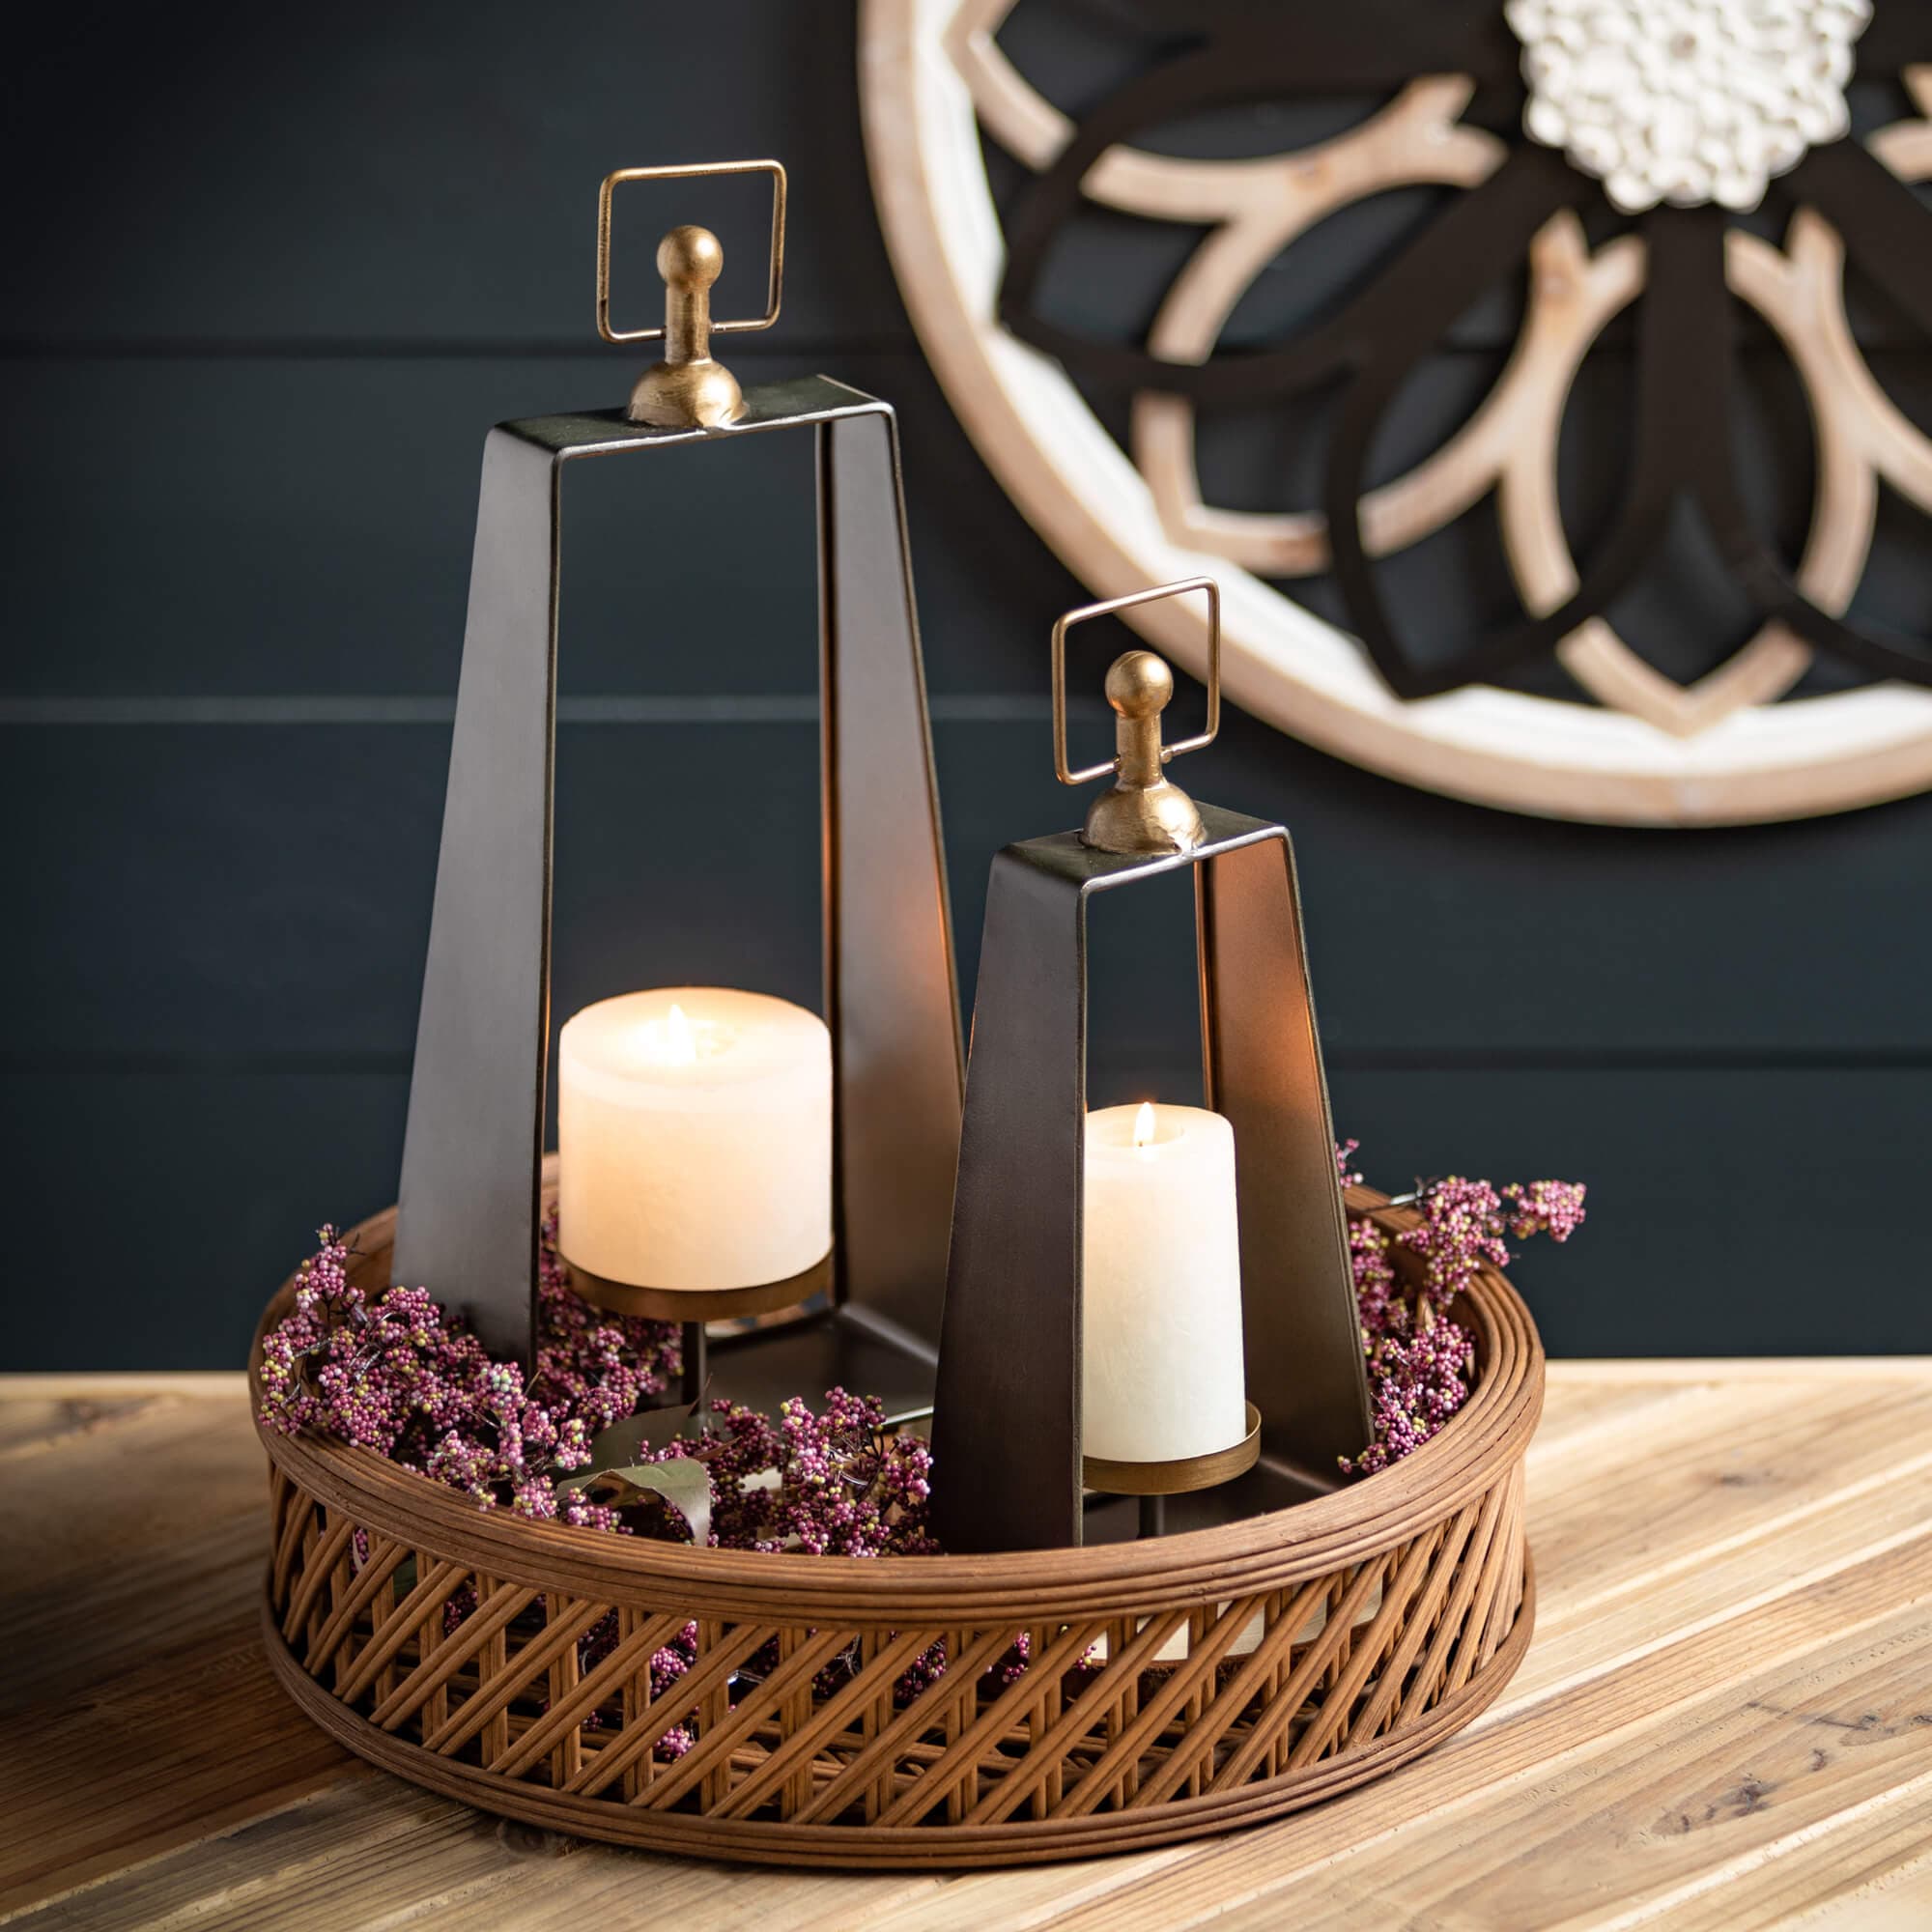 Tapered Framed Candle Holders Elevate Home Decor - Candle Holders